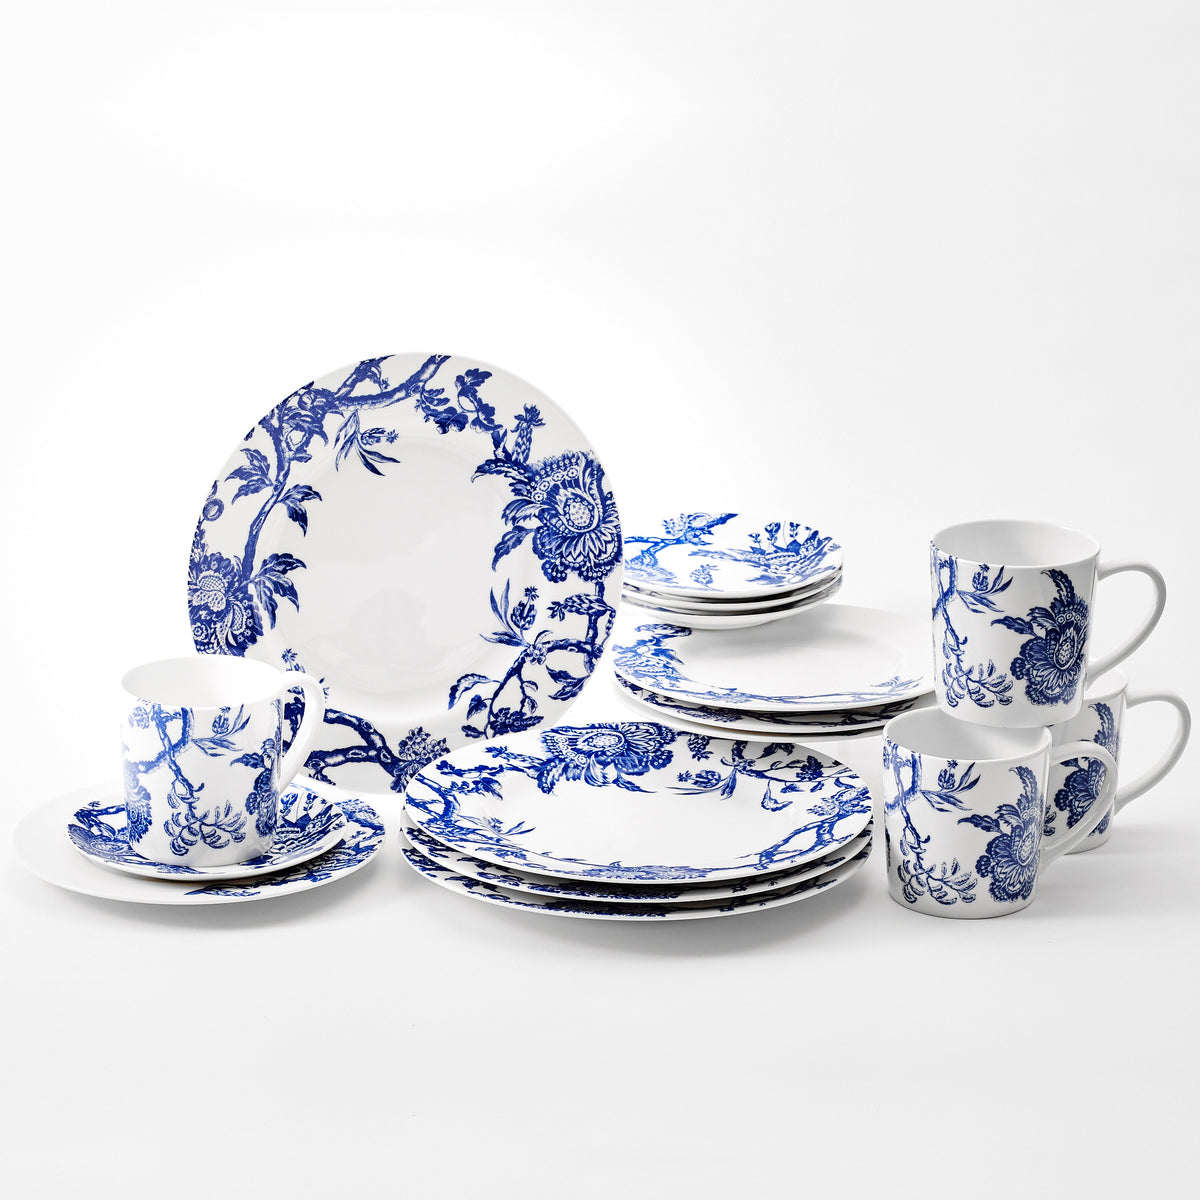 Arcadia 16 piece dinnerware set from Caskata. Set includes 4 dinner plates, 4 salad plates, 4 canape plates and 4 mugs in high-fired porcelain from Caskata.